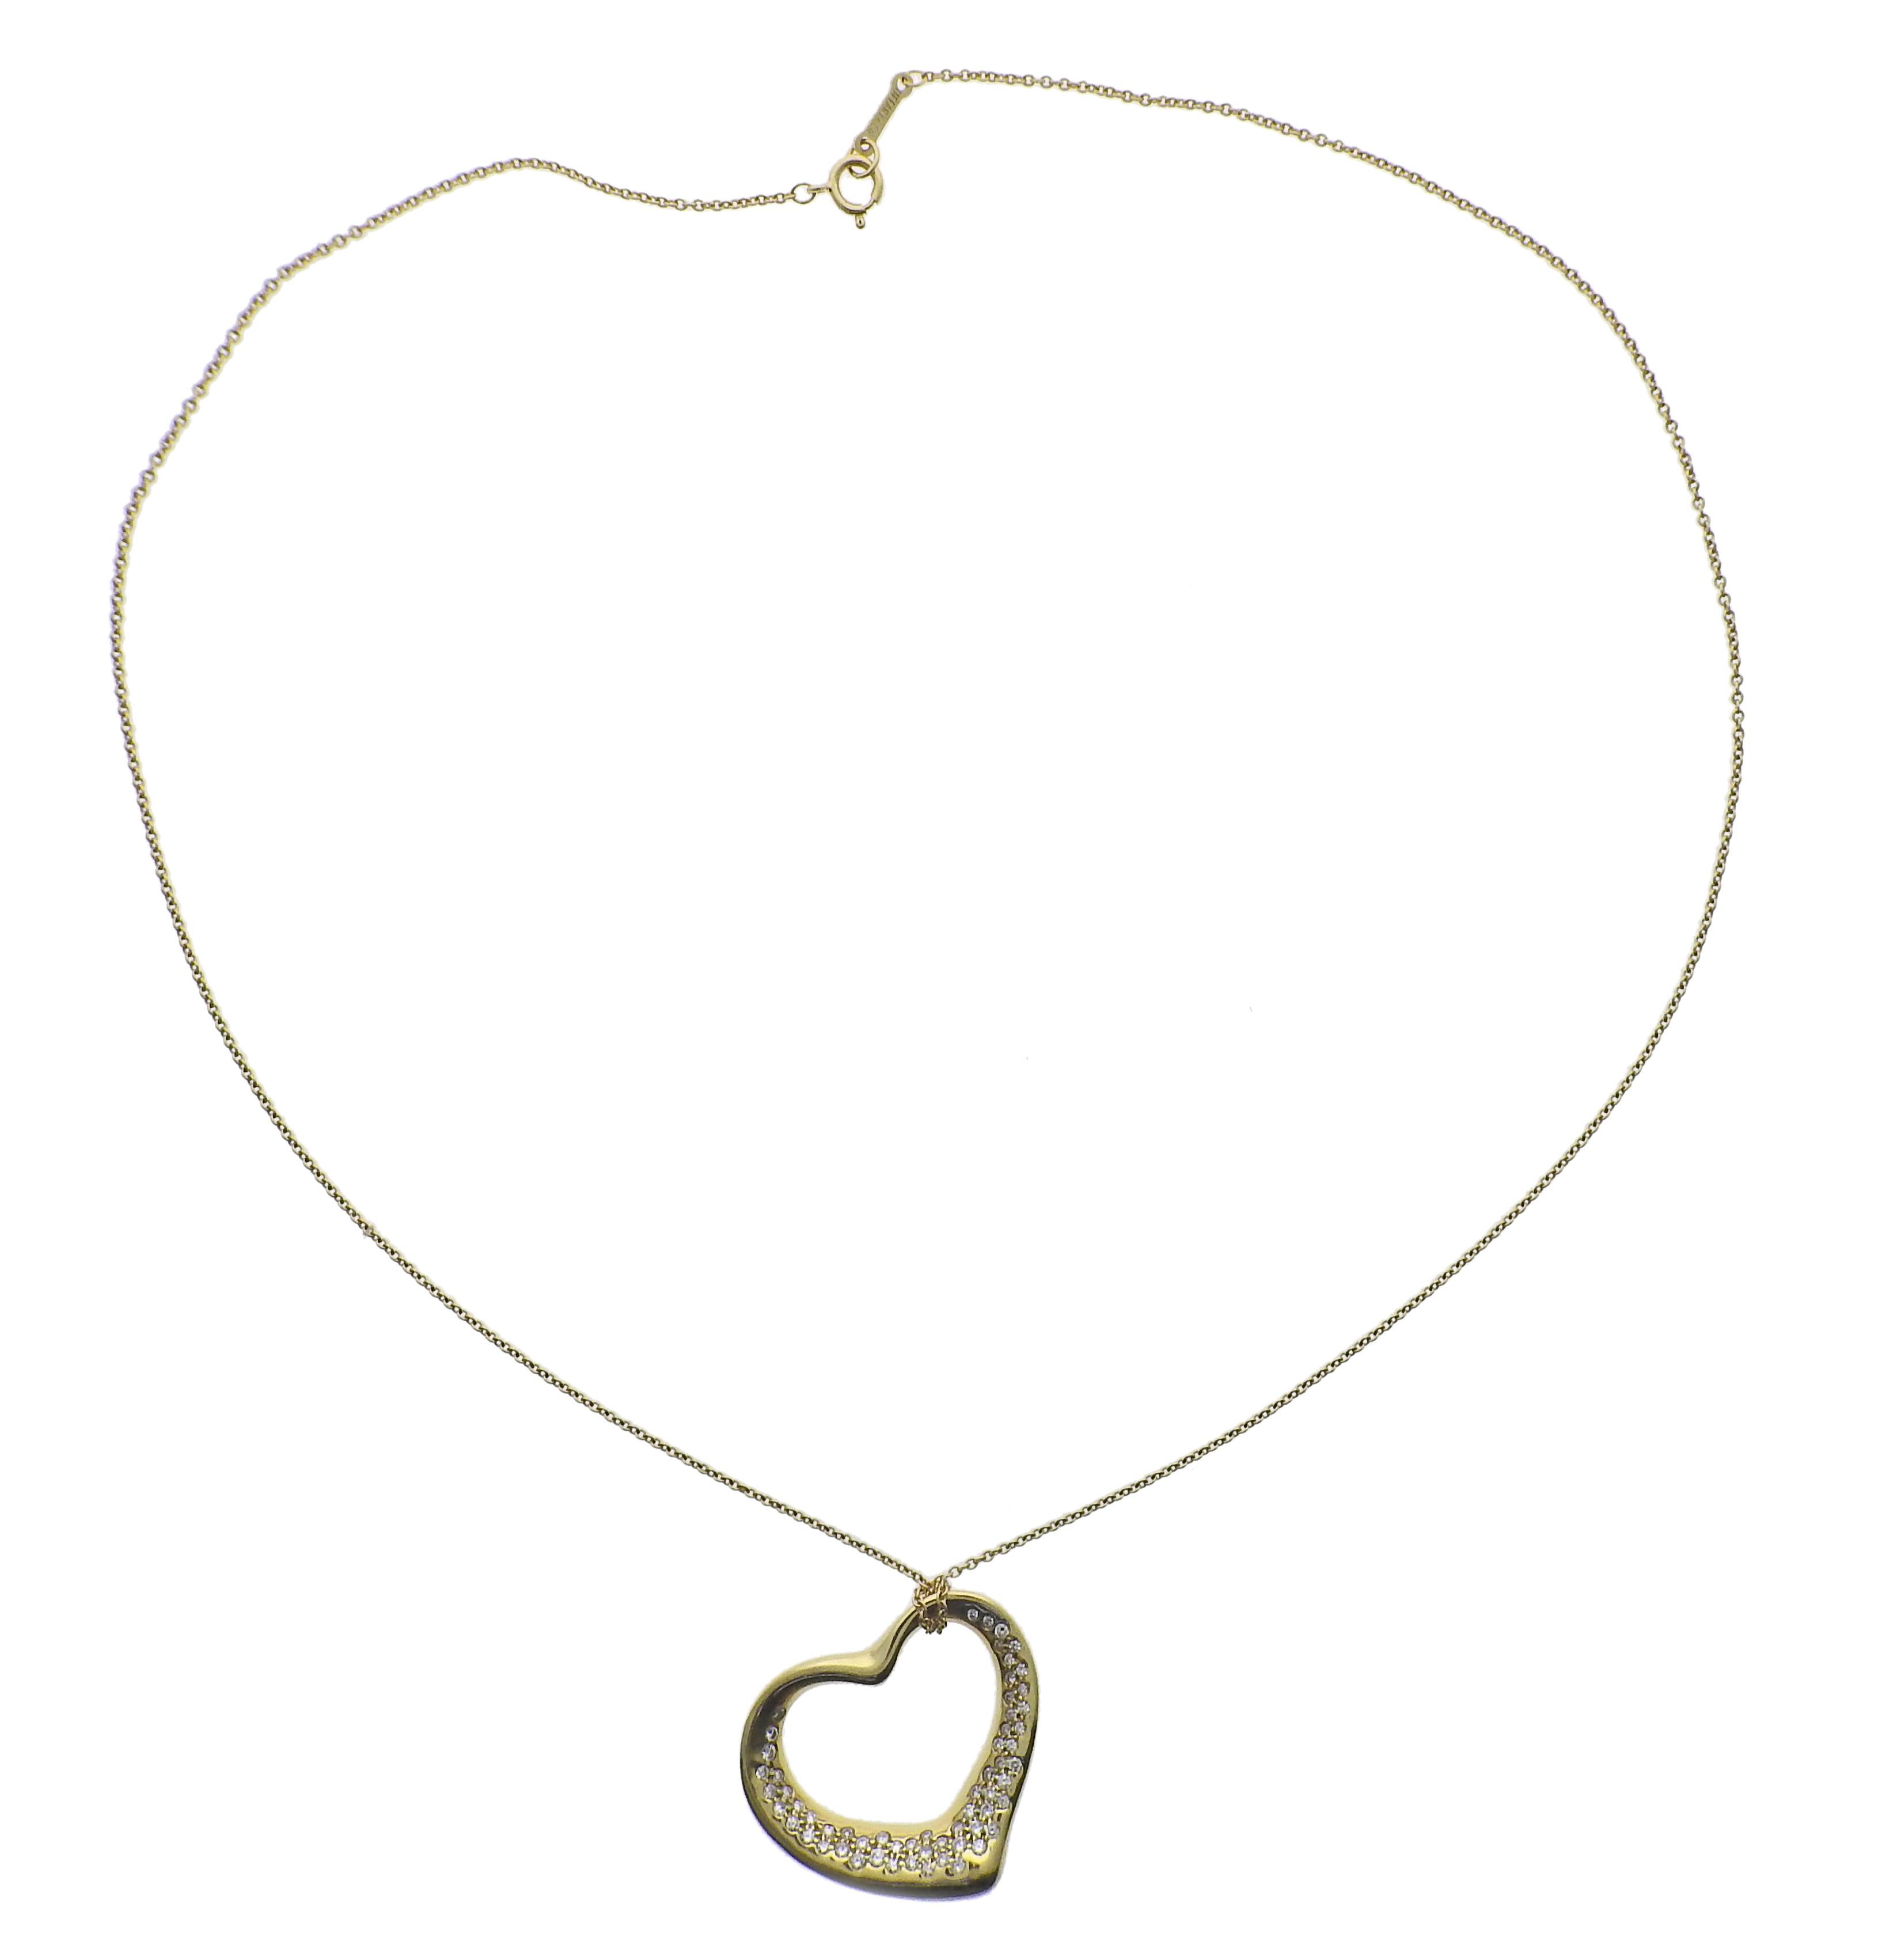 18K yellow gold open heart pendant necklace by Elsa Peretti for Tiffany & Co, set with 0.80ctw in G/VS diamonds. Neckalce measures 17